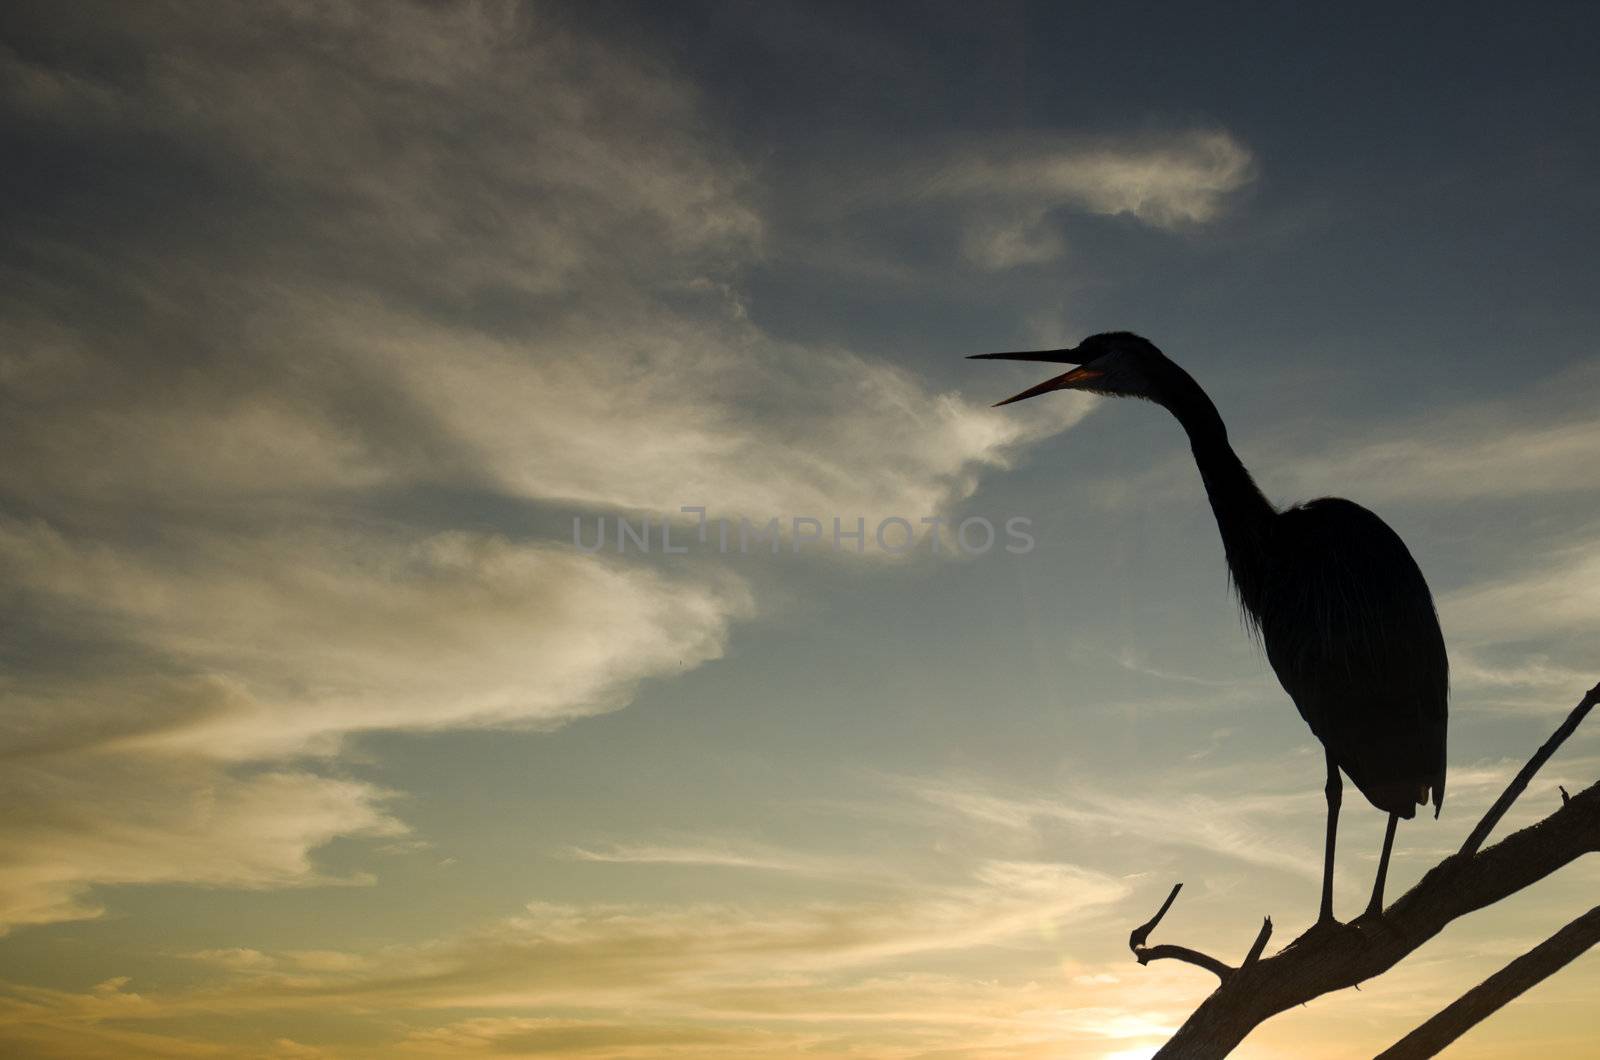 Silhouette of Heron at Sunset by Gordo25